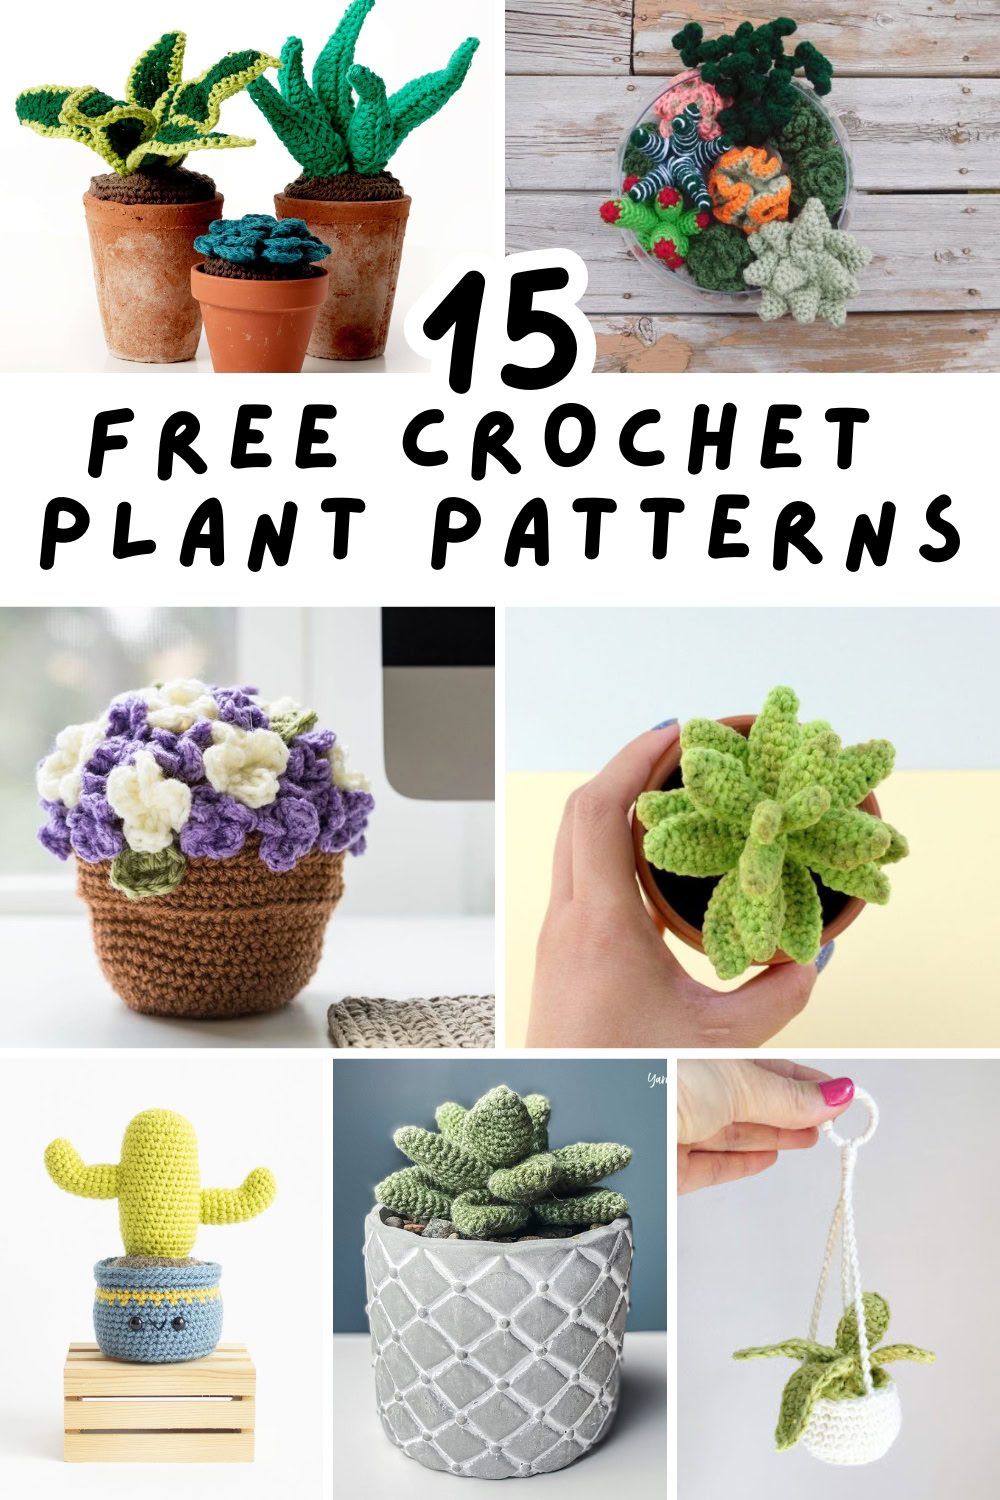 Create your own indoor garden with these free crochet patterns! 🌸 Perfect for beginners and experts alike, these succulent and cactus designs add a charming touch to any space. Download now and start crafting! #CrochetLove #HandmadeHome #SucculentPatterns